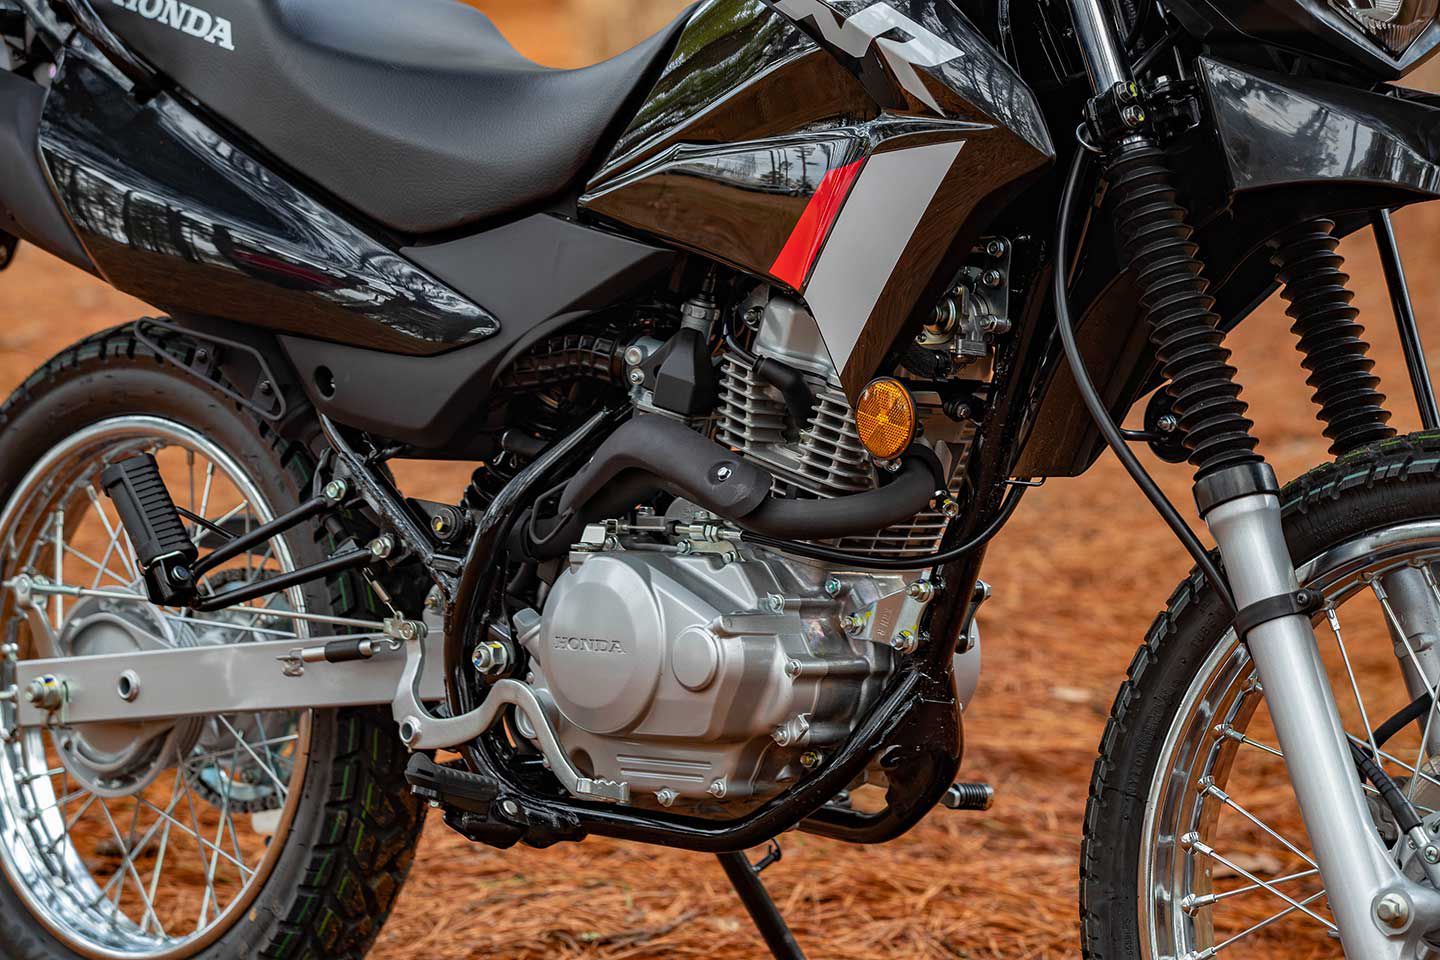 The apple doesn’t fall far from the tree. Like the larger-displacement XR, the XR150L’s engine is air-cooled and uses a carburetor for fueling.